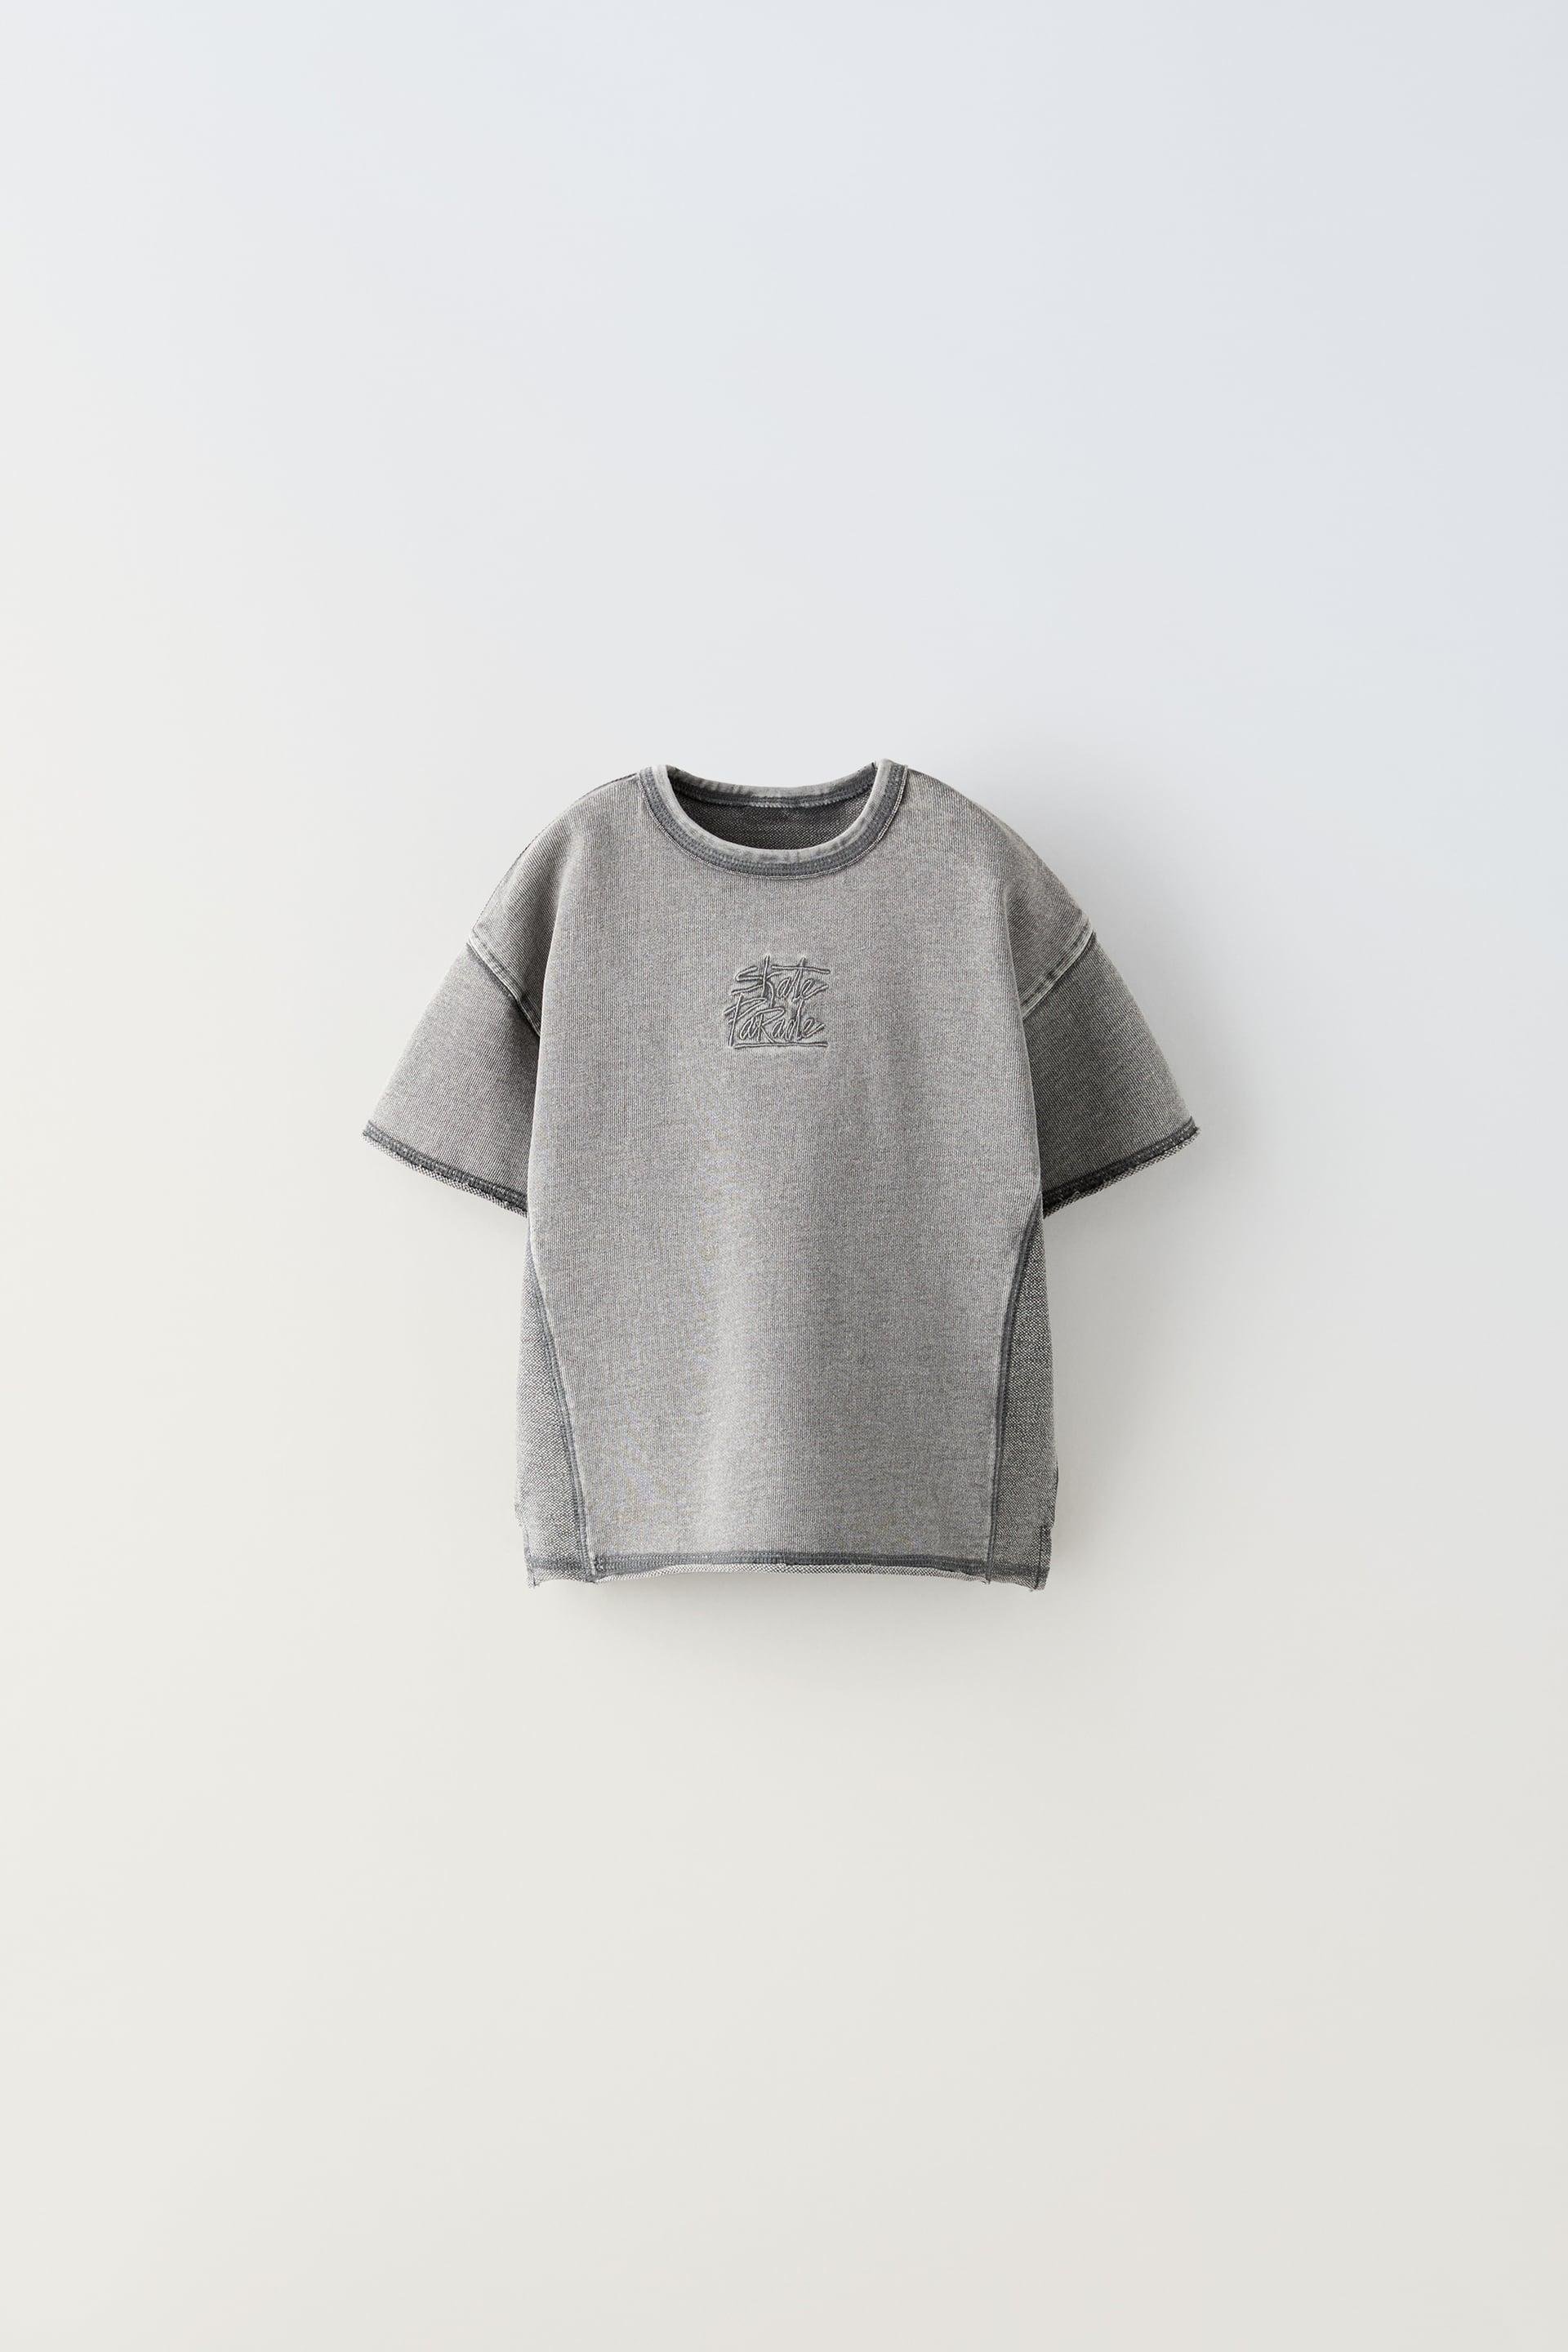 WASHED EFFECT EMBROIDERED T-SHIRT by ZARA